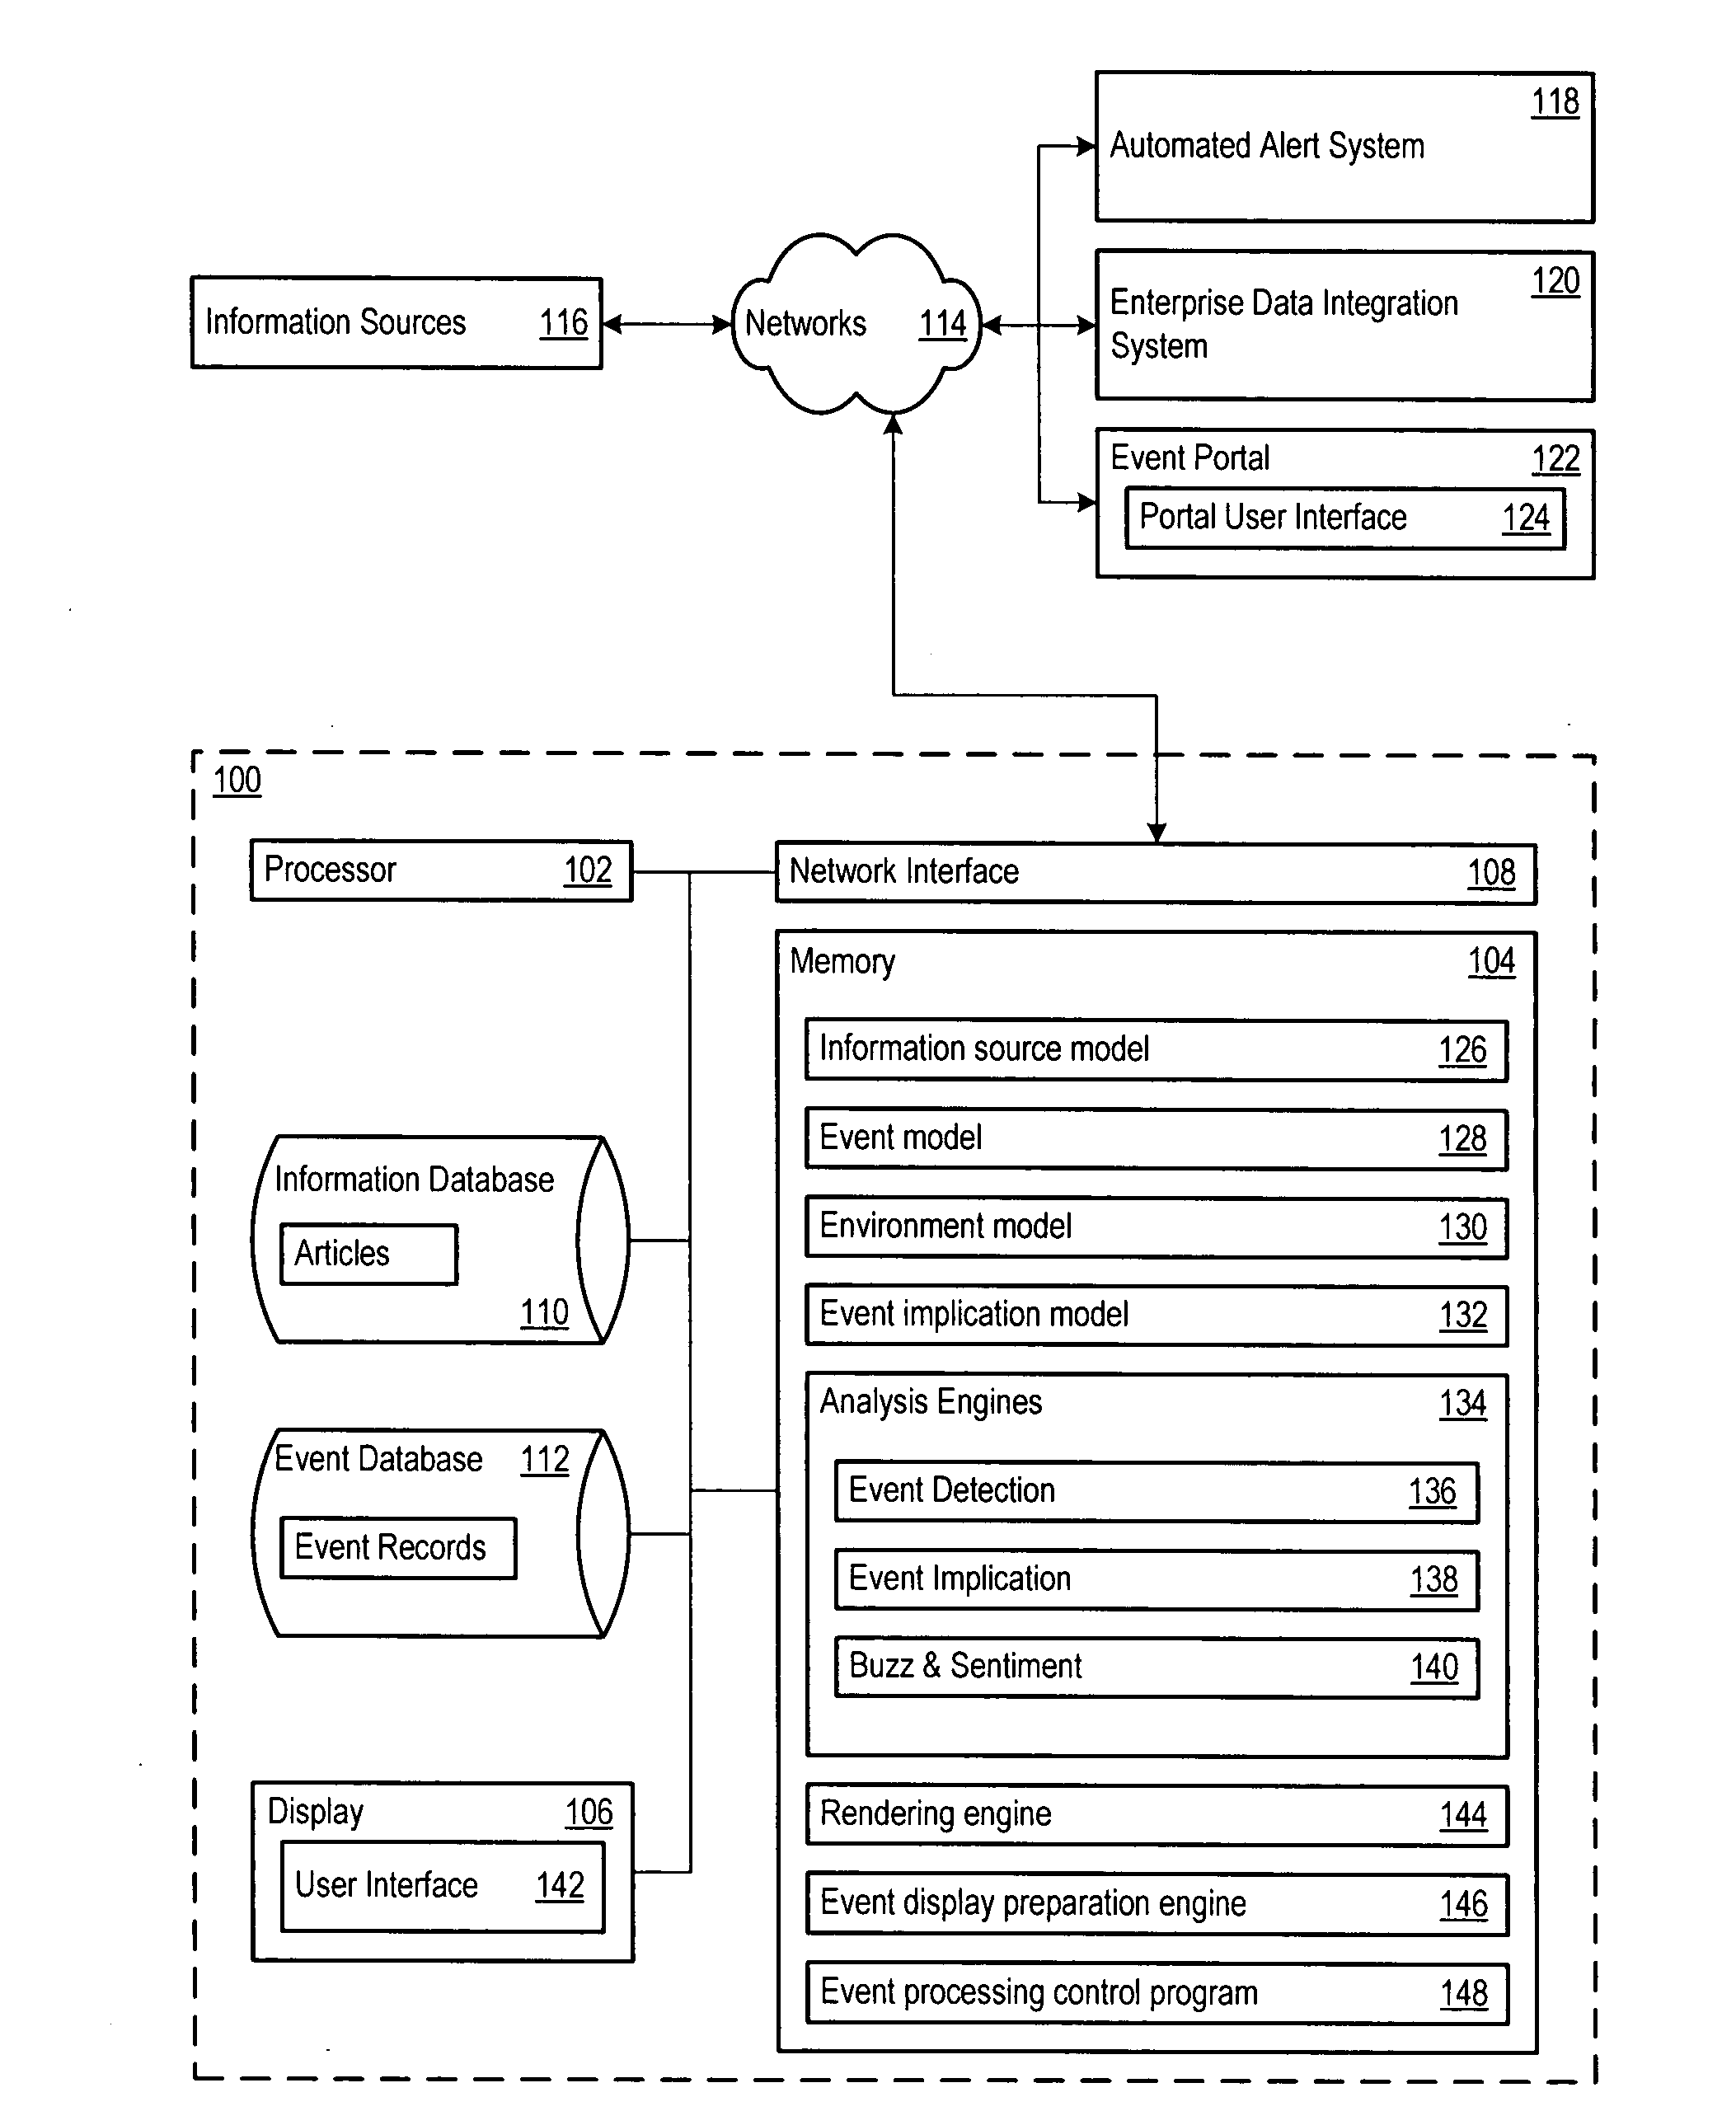 Technology event detection, analysis, and reporting system